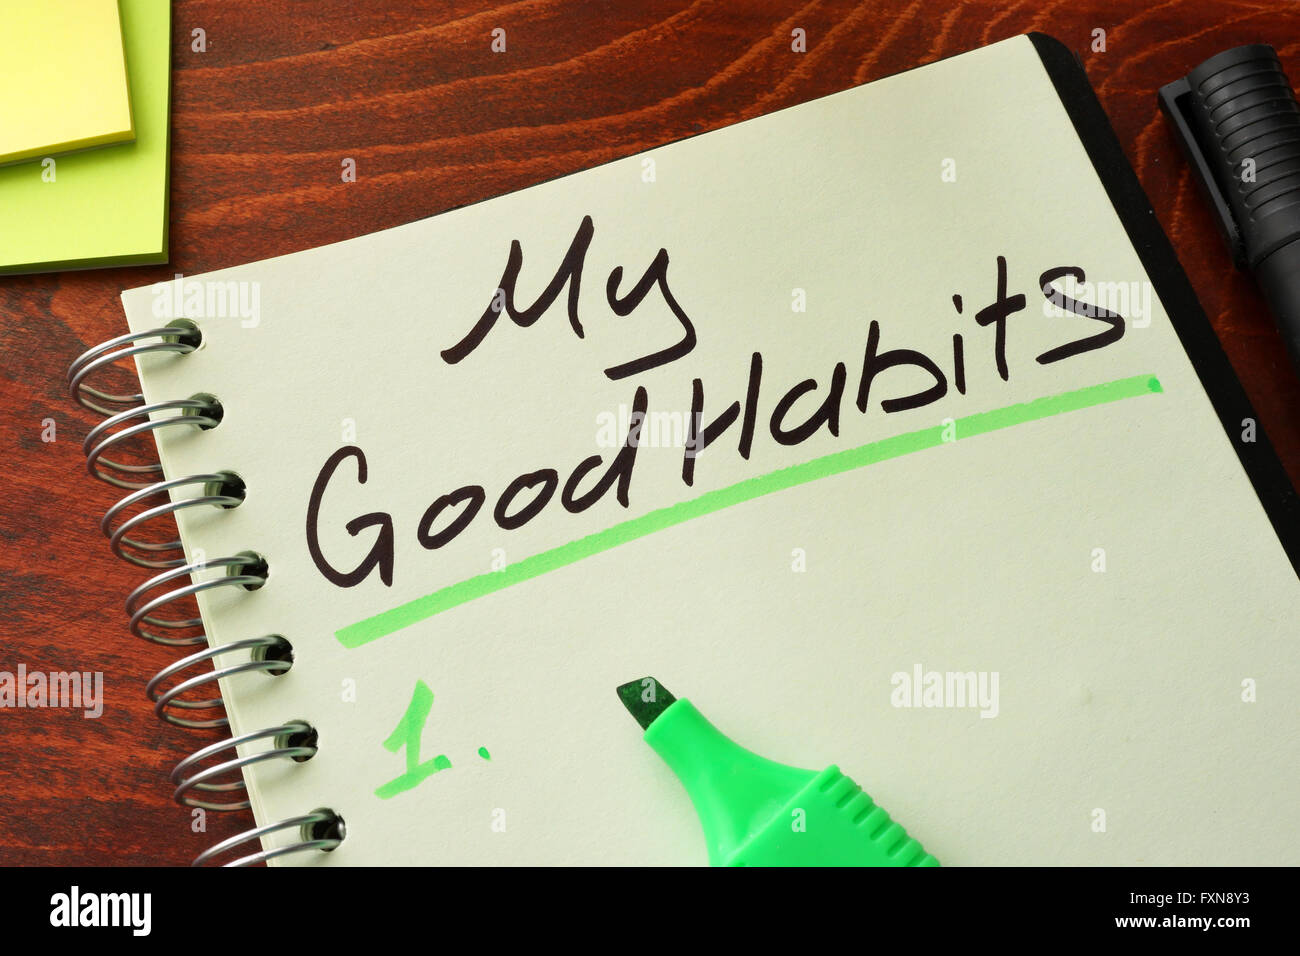 My good habits written on a notepad. Motivation concept. Stock Photo